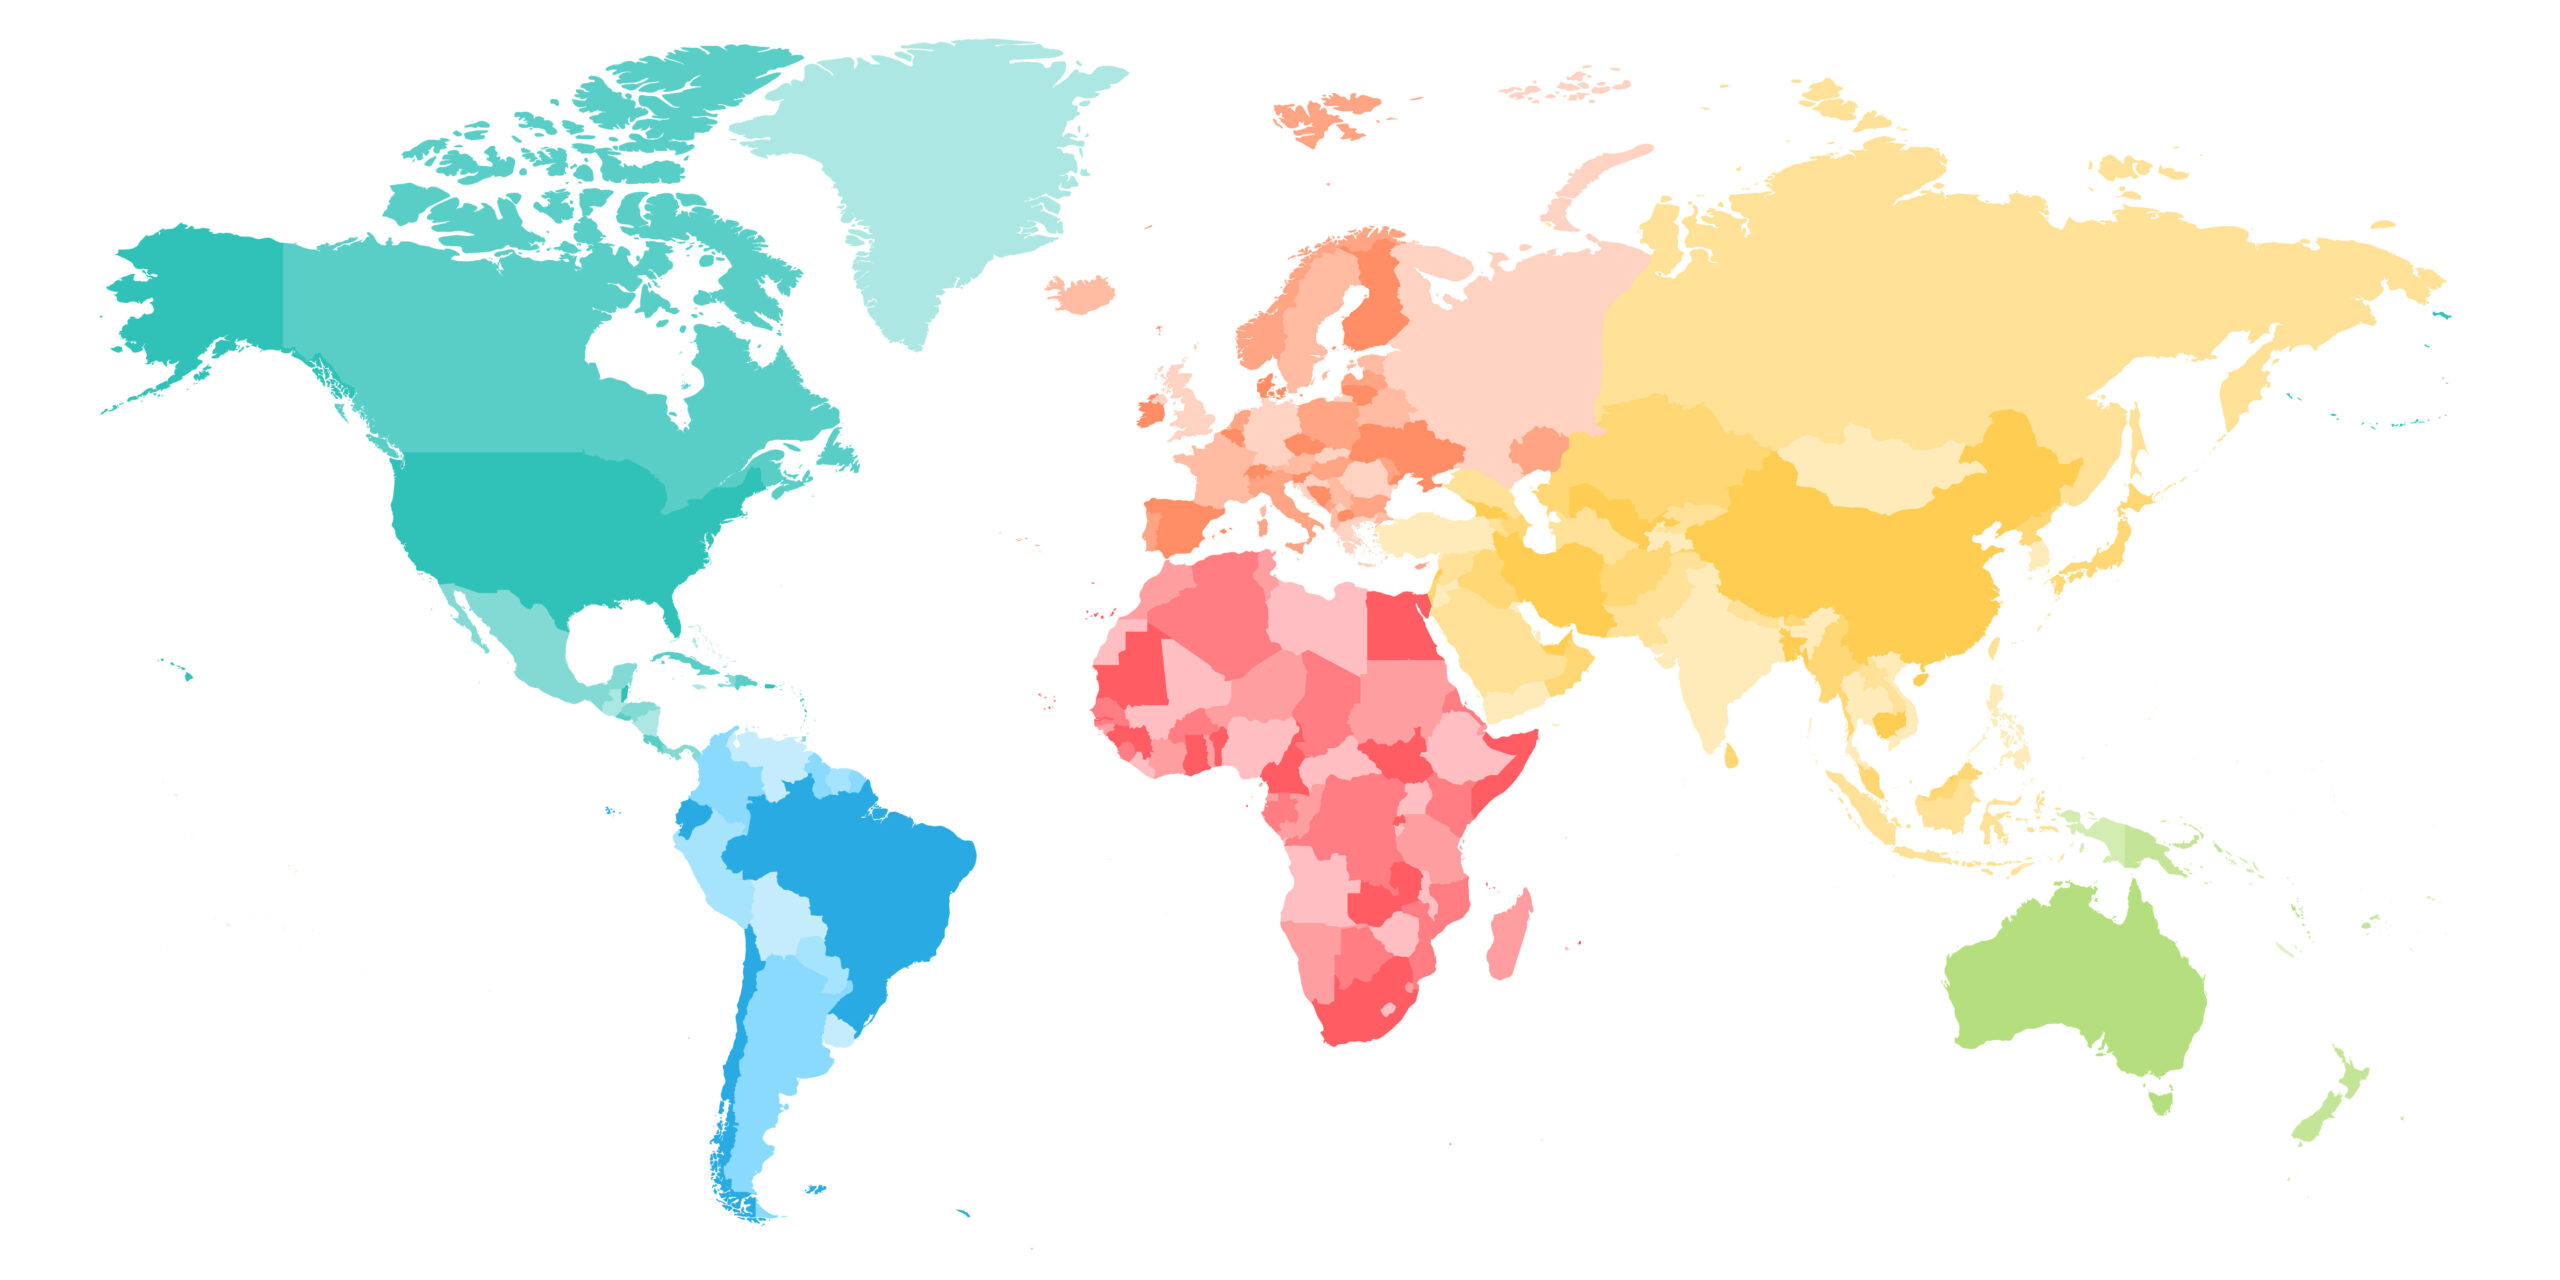 Colorful political map of World divided into six continents. Blank vector map in rainbow spectrum colors